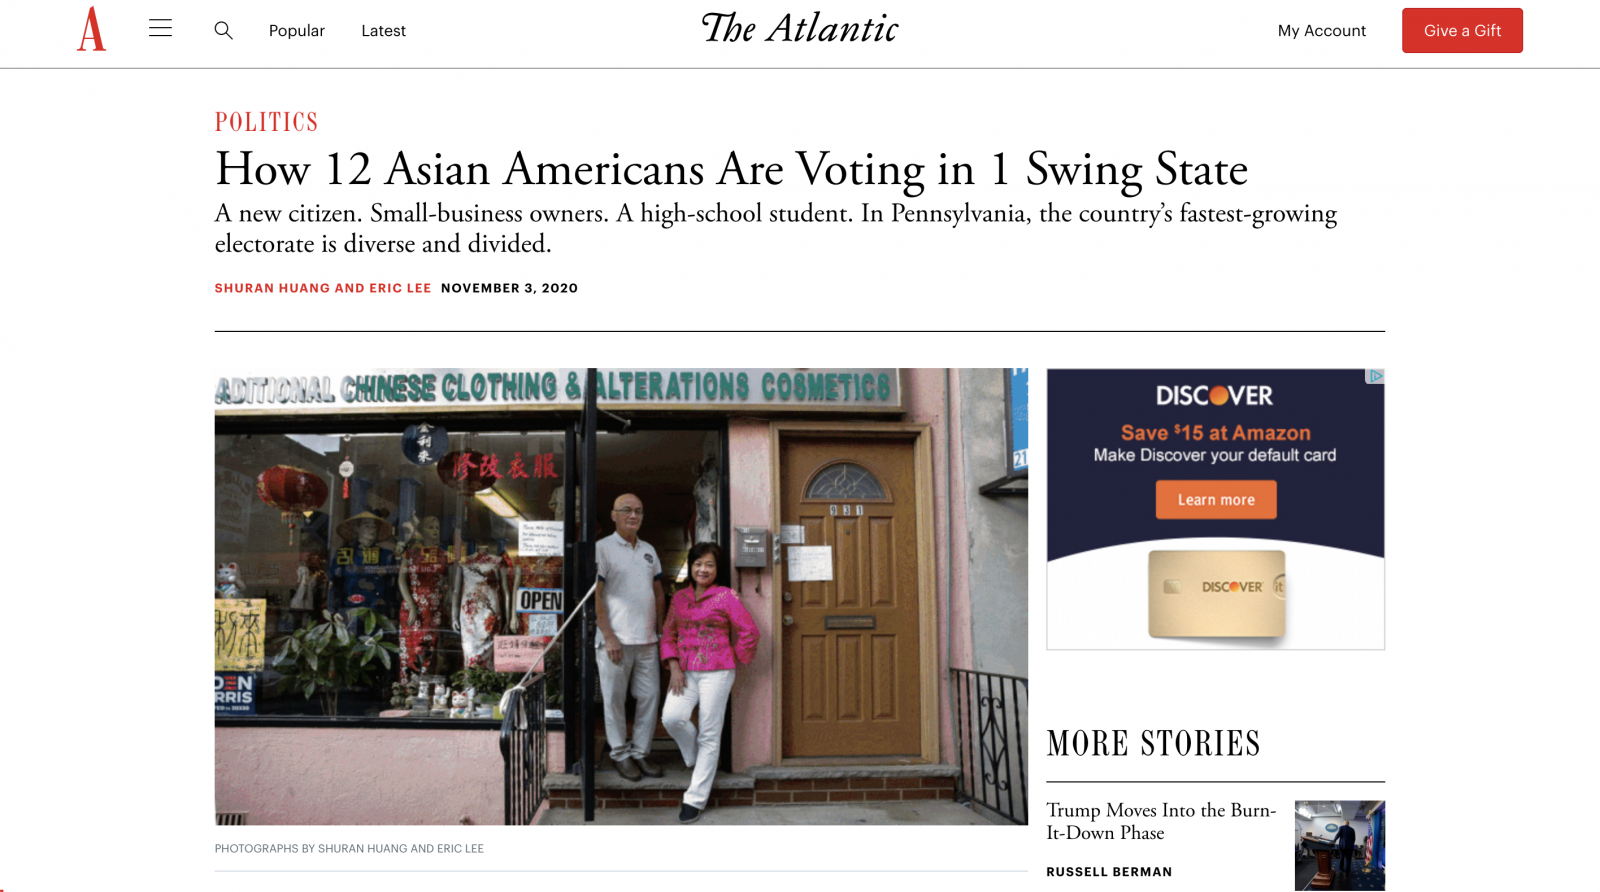 On The Atlantic: How 12 Asian Americans Are Voting in 1 Swing State